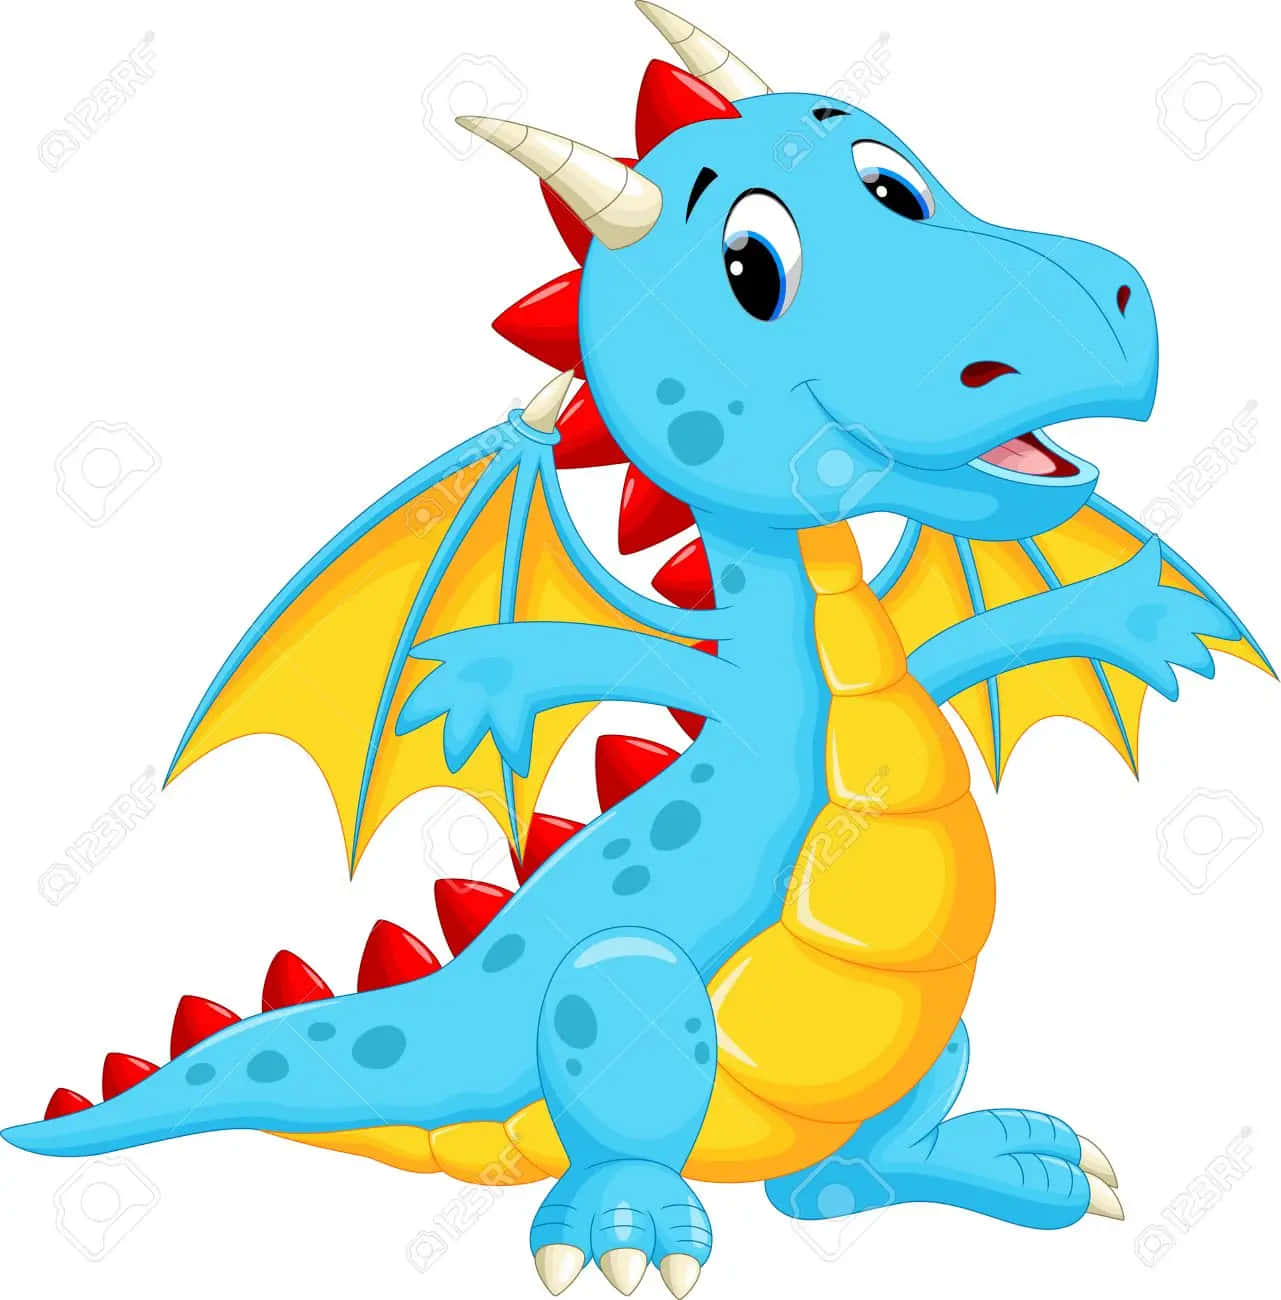 Cute Blue Dragon Pictures